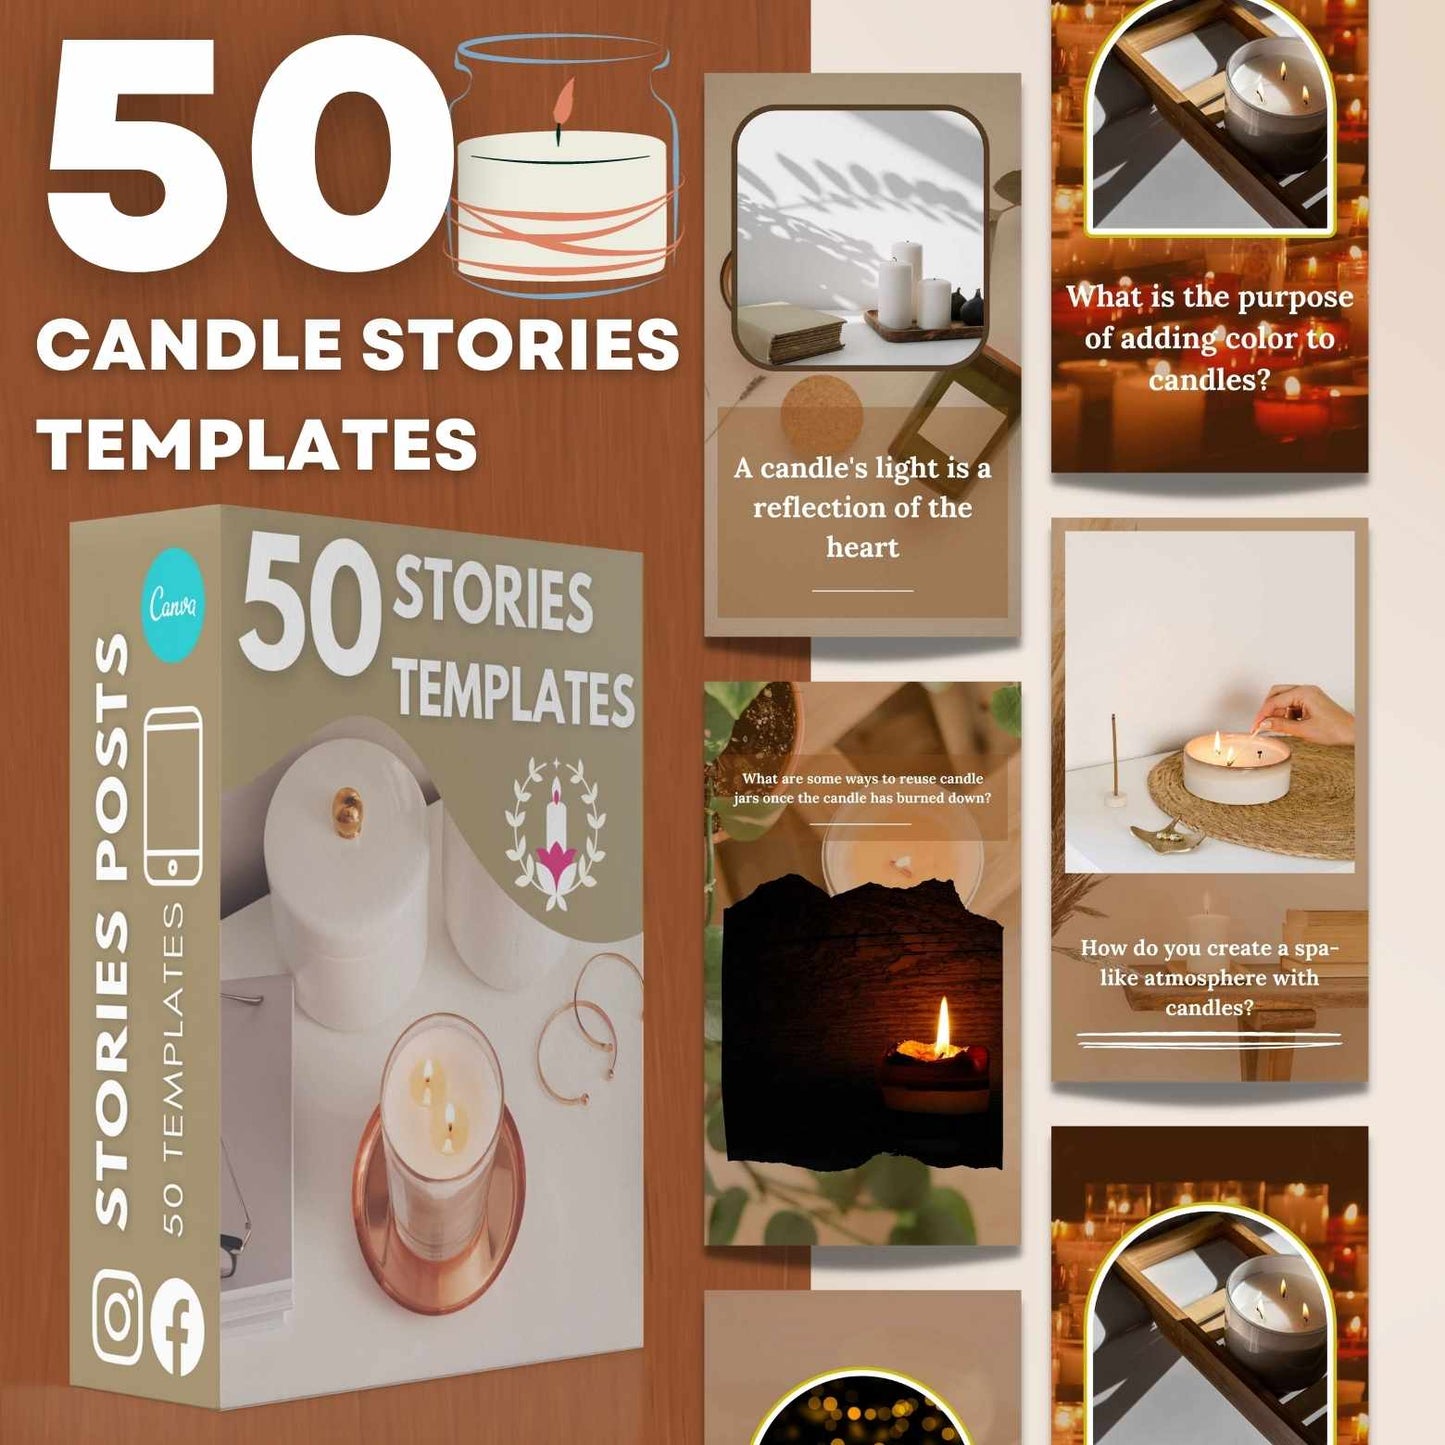 50 Candle Stories Templates